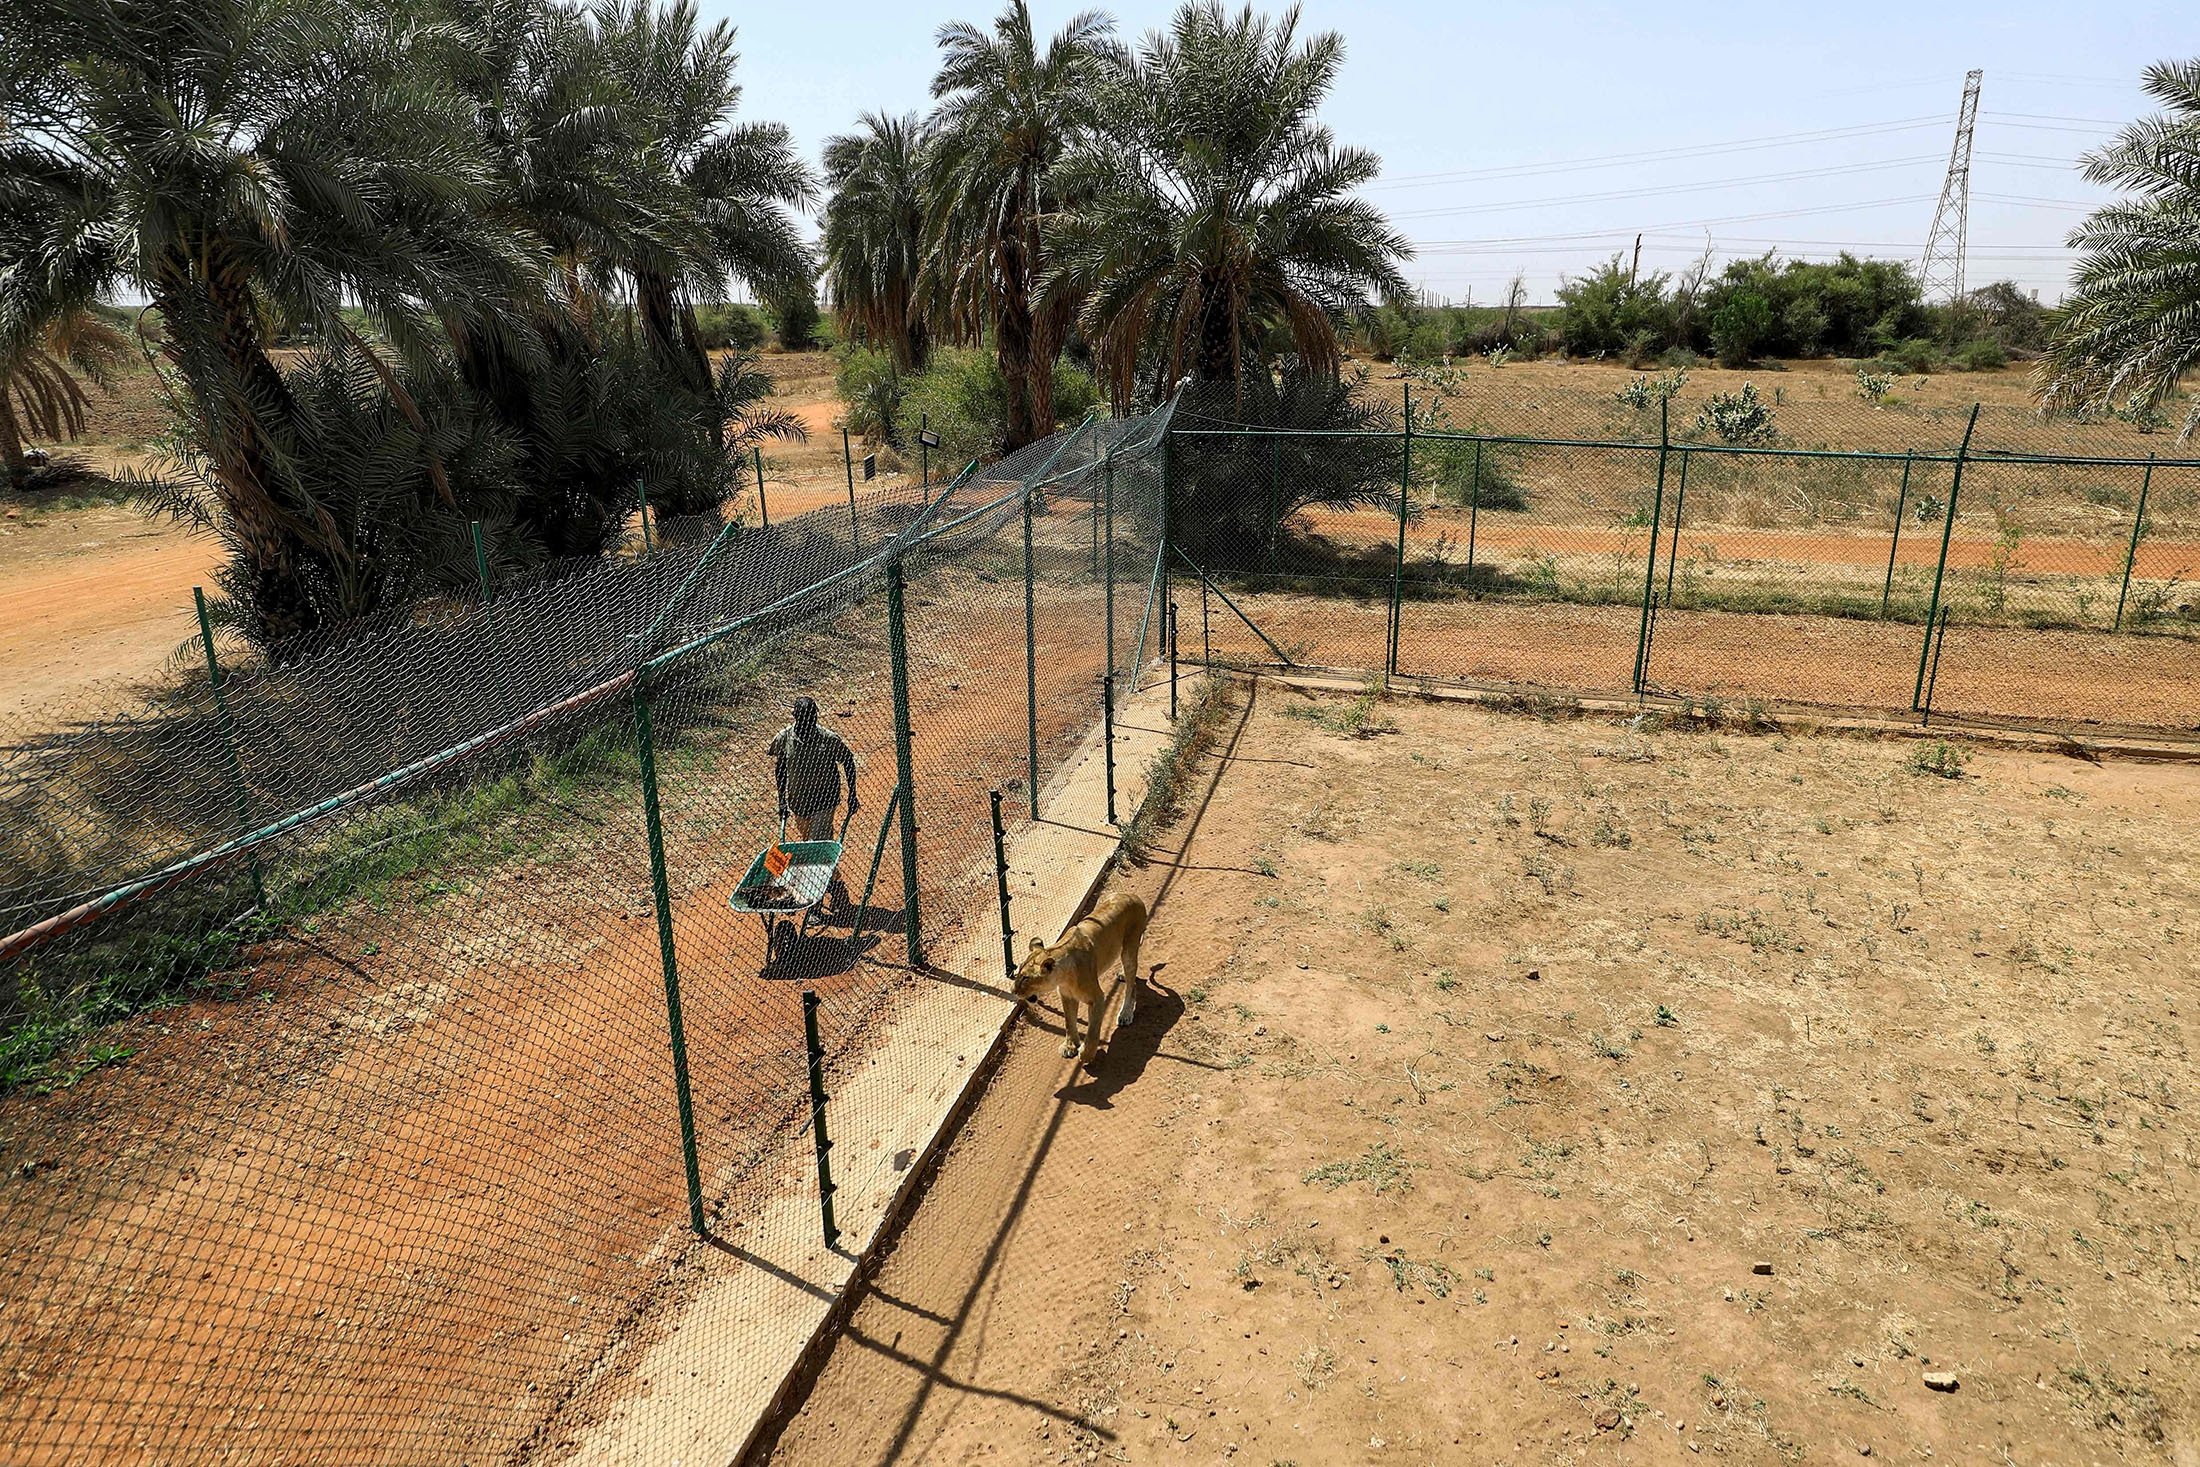 A lioness follows an animal keeper carrying food in a wheelbarrow from behind the fence of an enclosure at the Sudan Animal Rescue center in al-Bageir, south of the capital Khartoum, Sudan, Feb.  28, 2022. (AFP Photo)